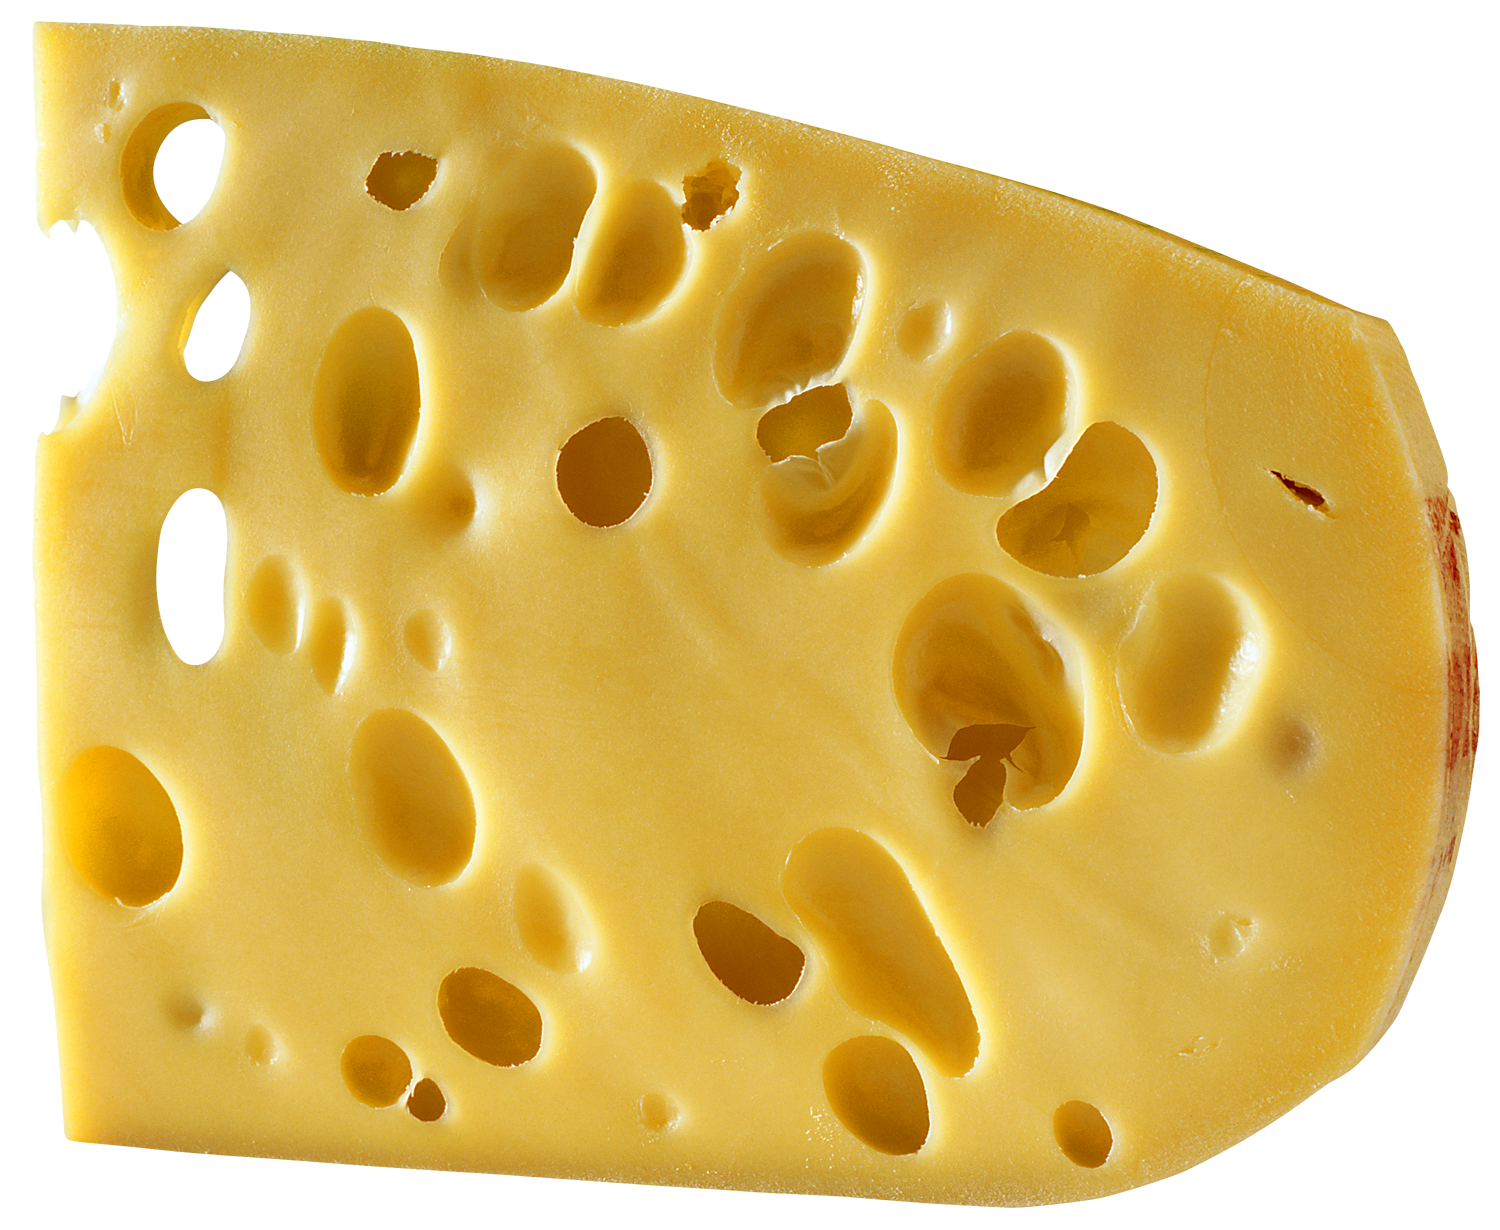 clipart face cheese